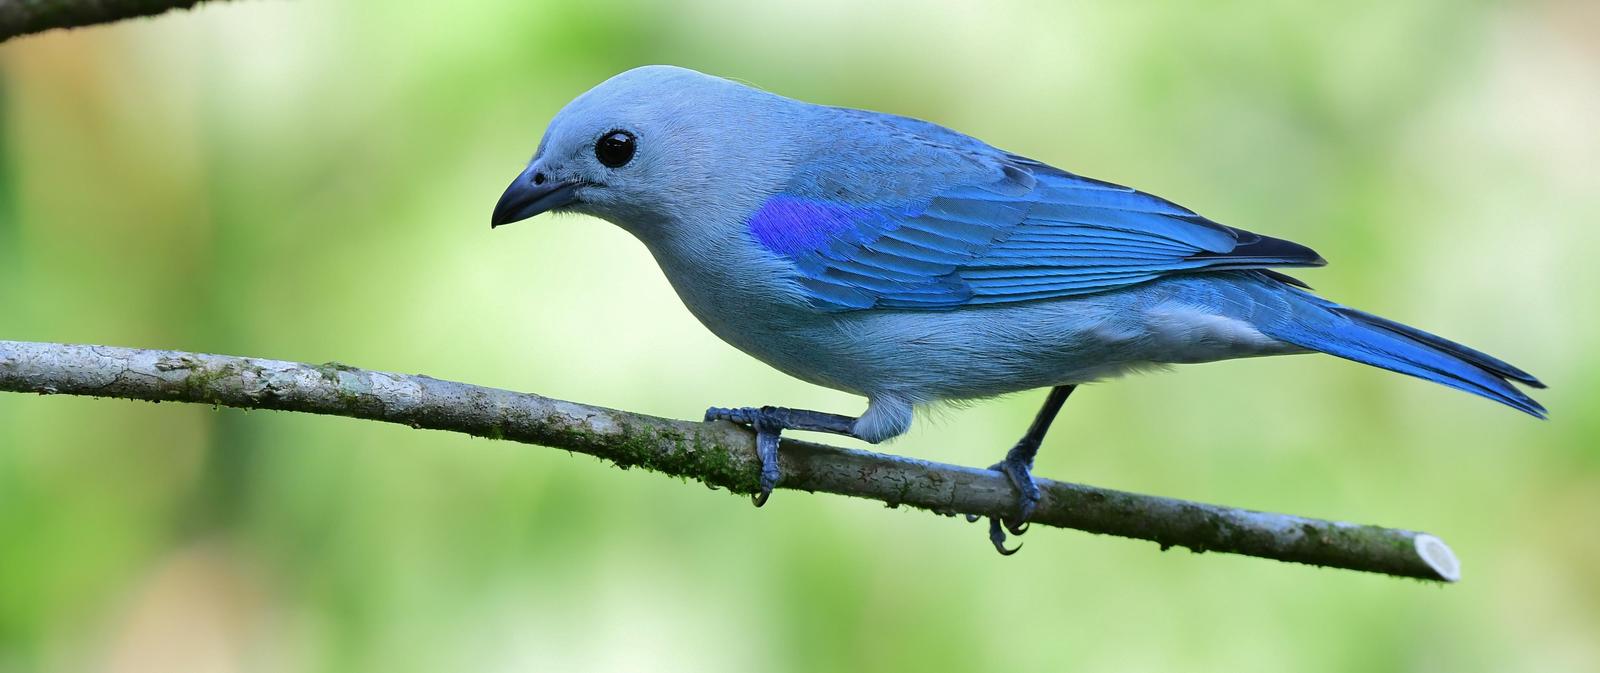 Blue-gray Tanager Photo by Gareth Rasberry